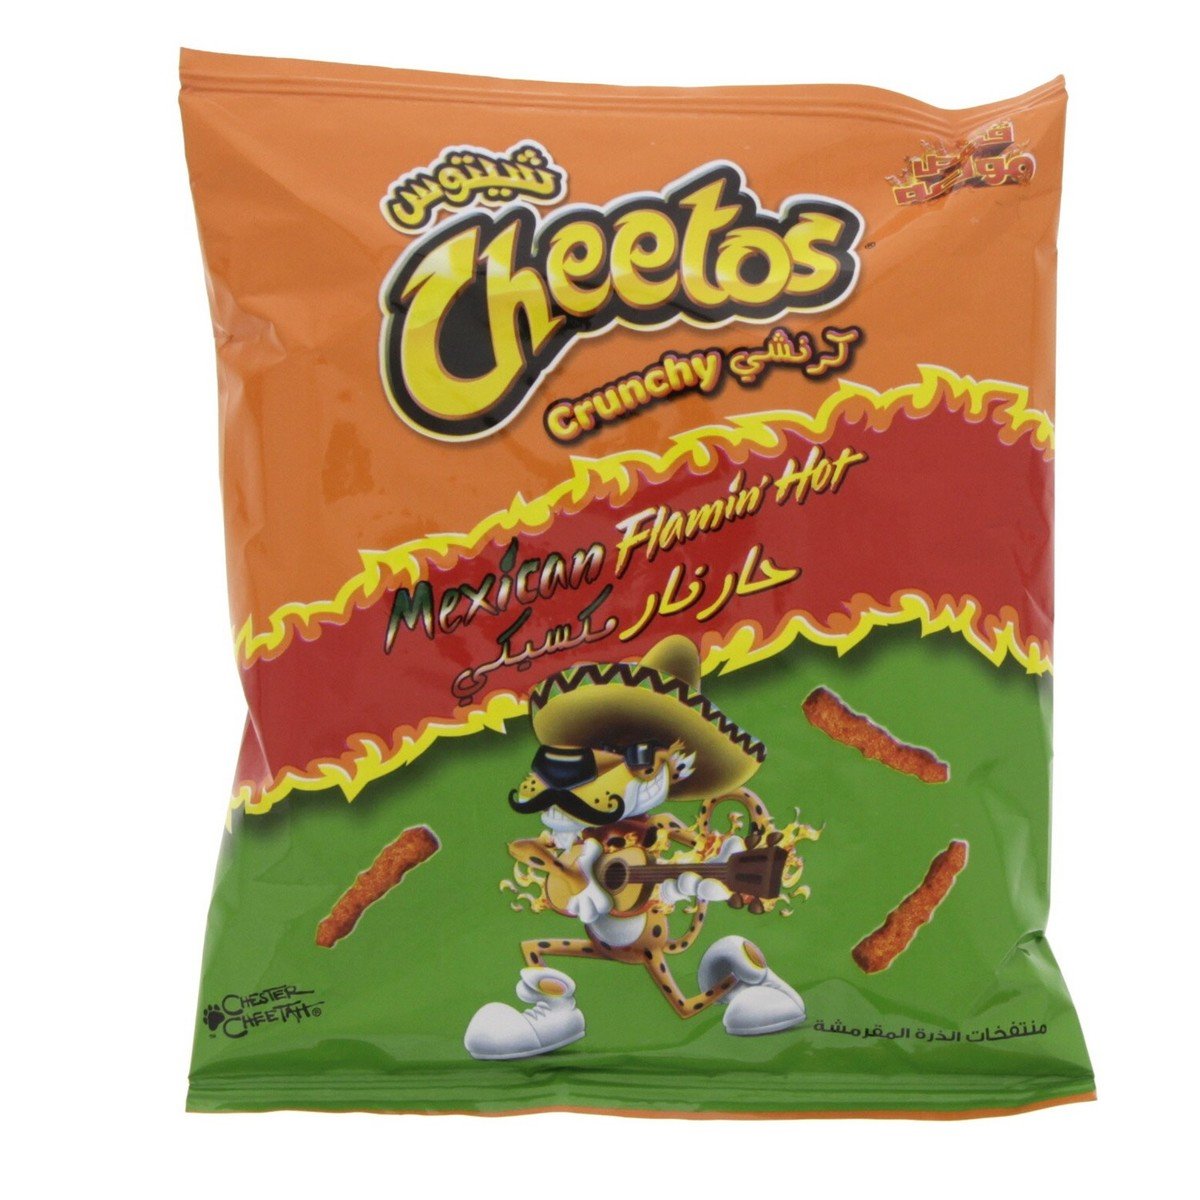 Cheetos Crunchy Flaming Hot Chips 50g Online at Best Price, Corn Based  Bags